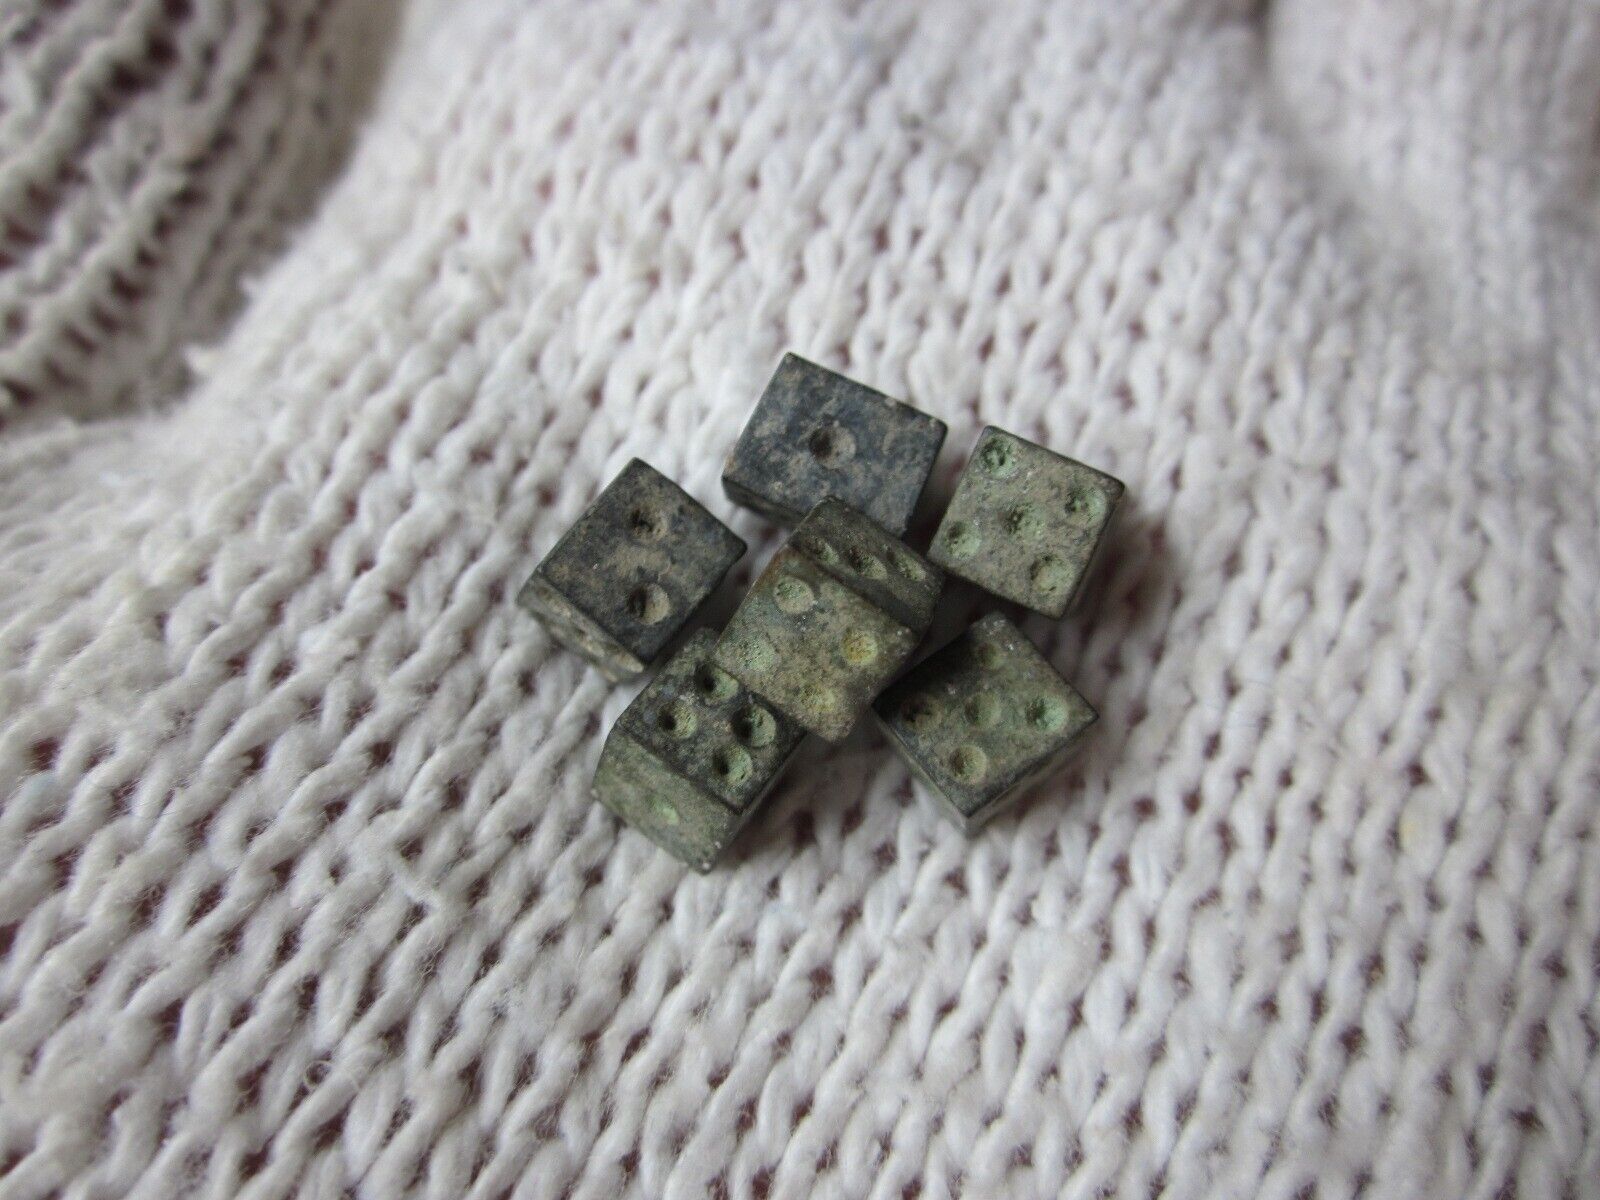 6 ancient Roman legionnaire gambling pieces bronze engraved small dice I - II AD